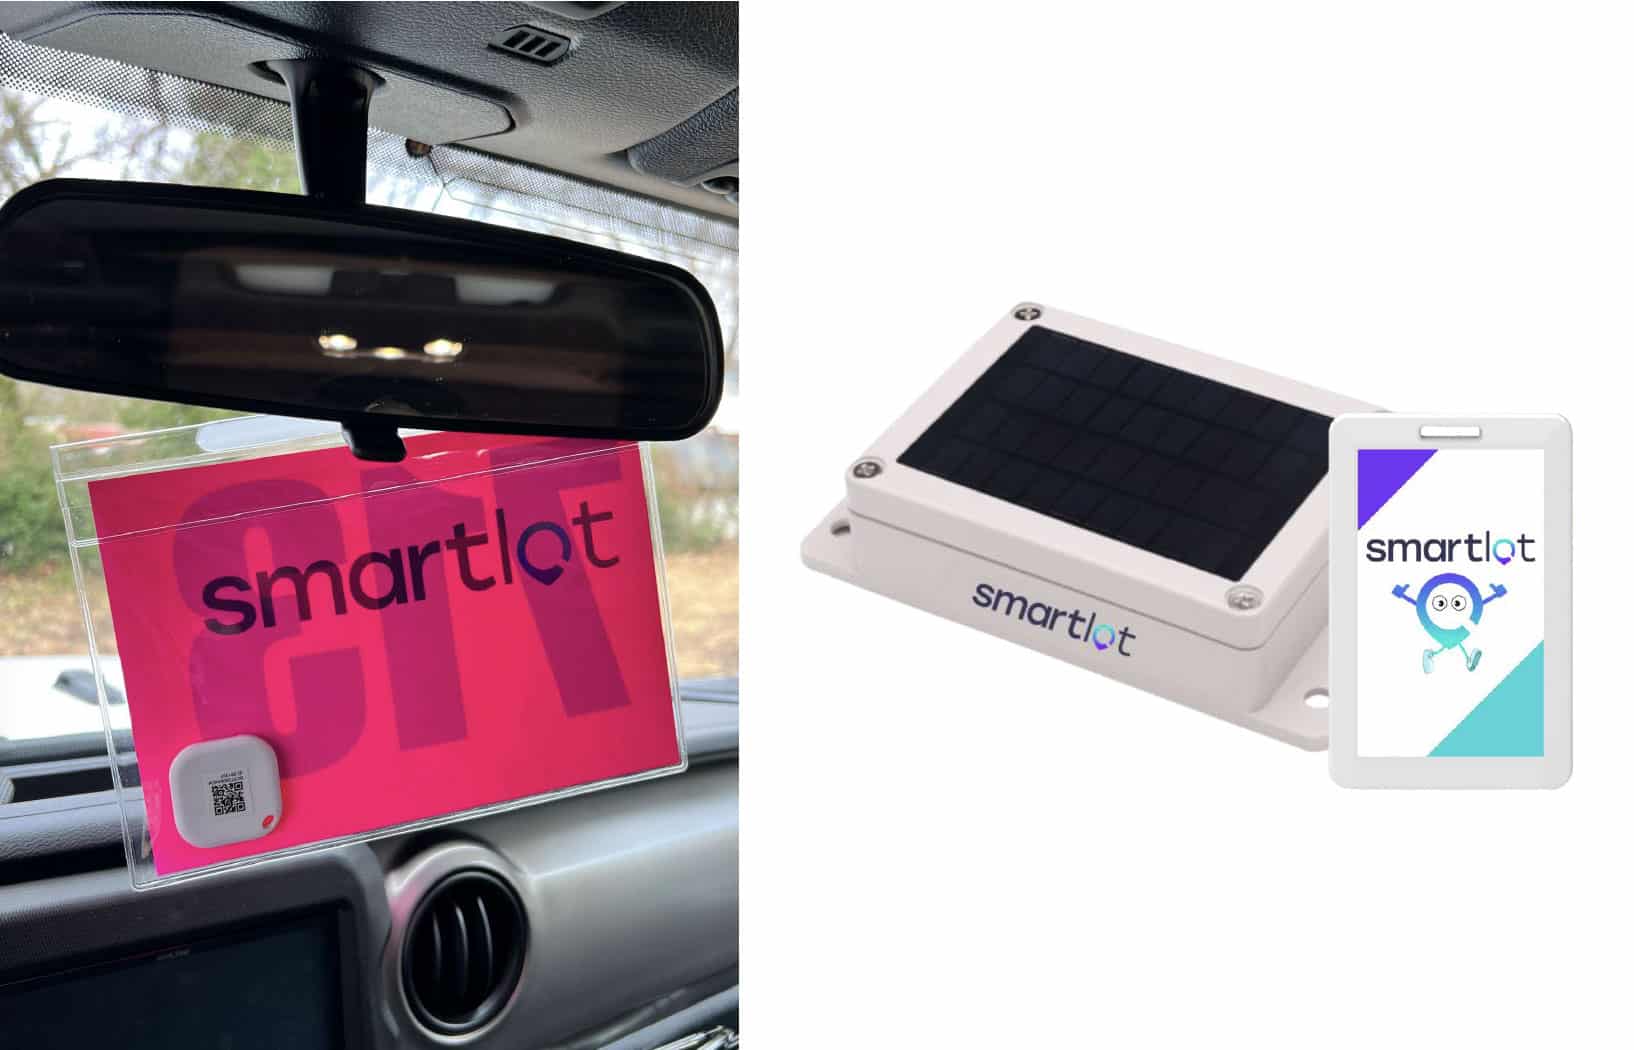 On the left, a plastic sleeve saying “Smart Lot” hangs from a car with a small, white smart tag sensor in the sleeve. On the right is the Smart Lot sensor that looks like a handheld rectangular box with the “Smart Lot” logo on the rim